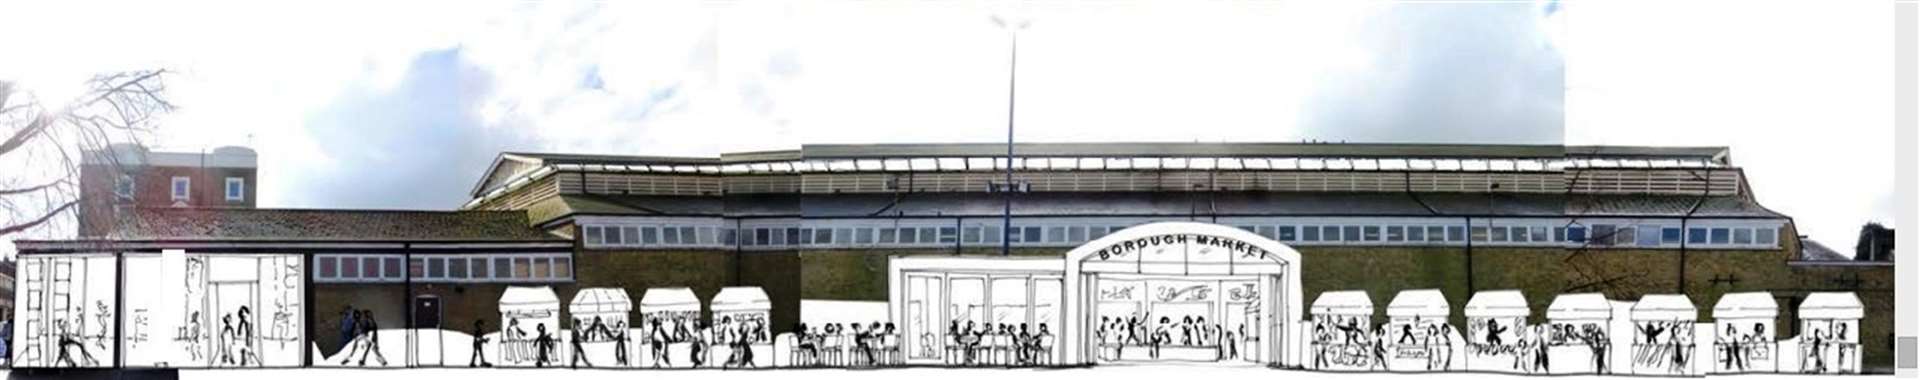 Plans of how the new-look Gravesend Borough Market could look